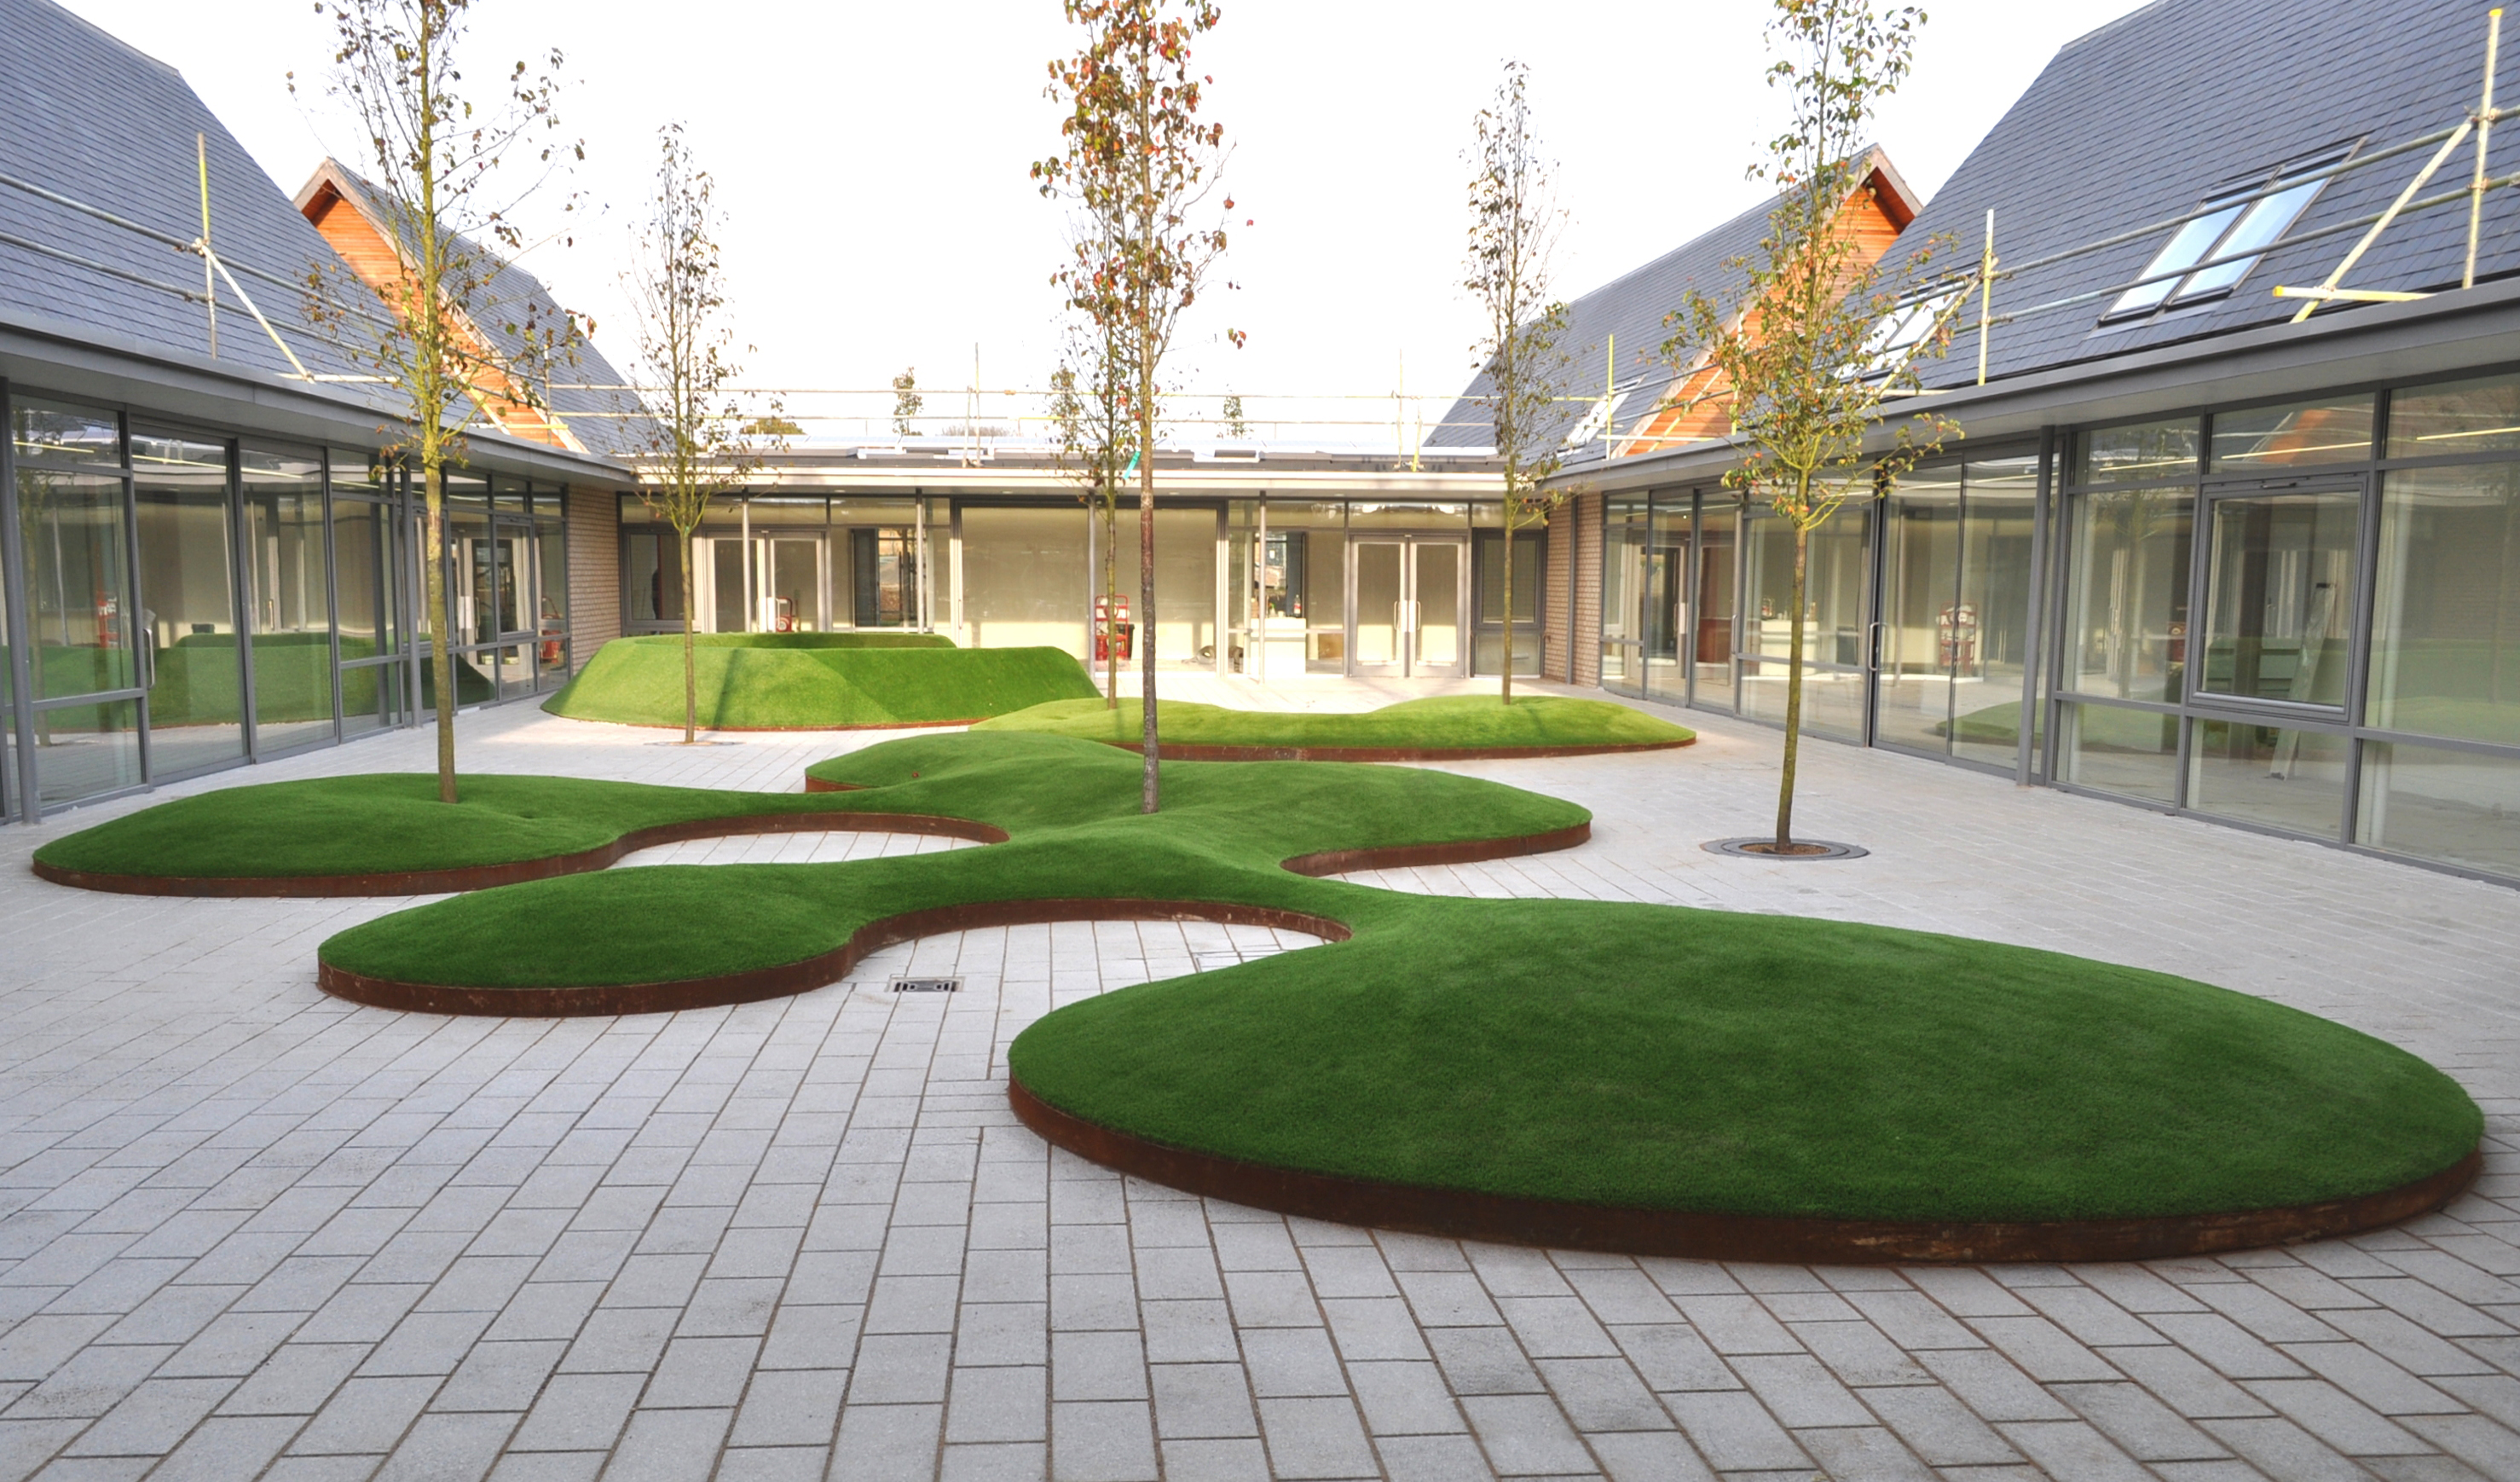 Landscape edging solutions to fit any project